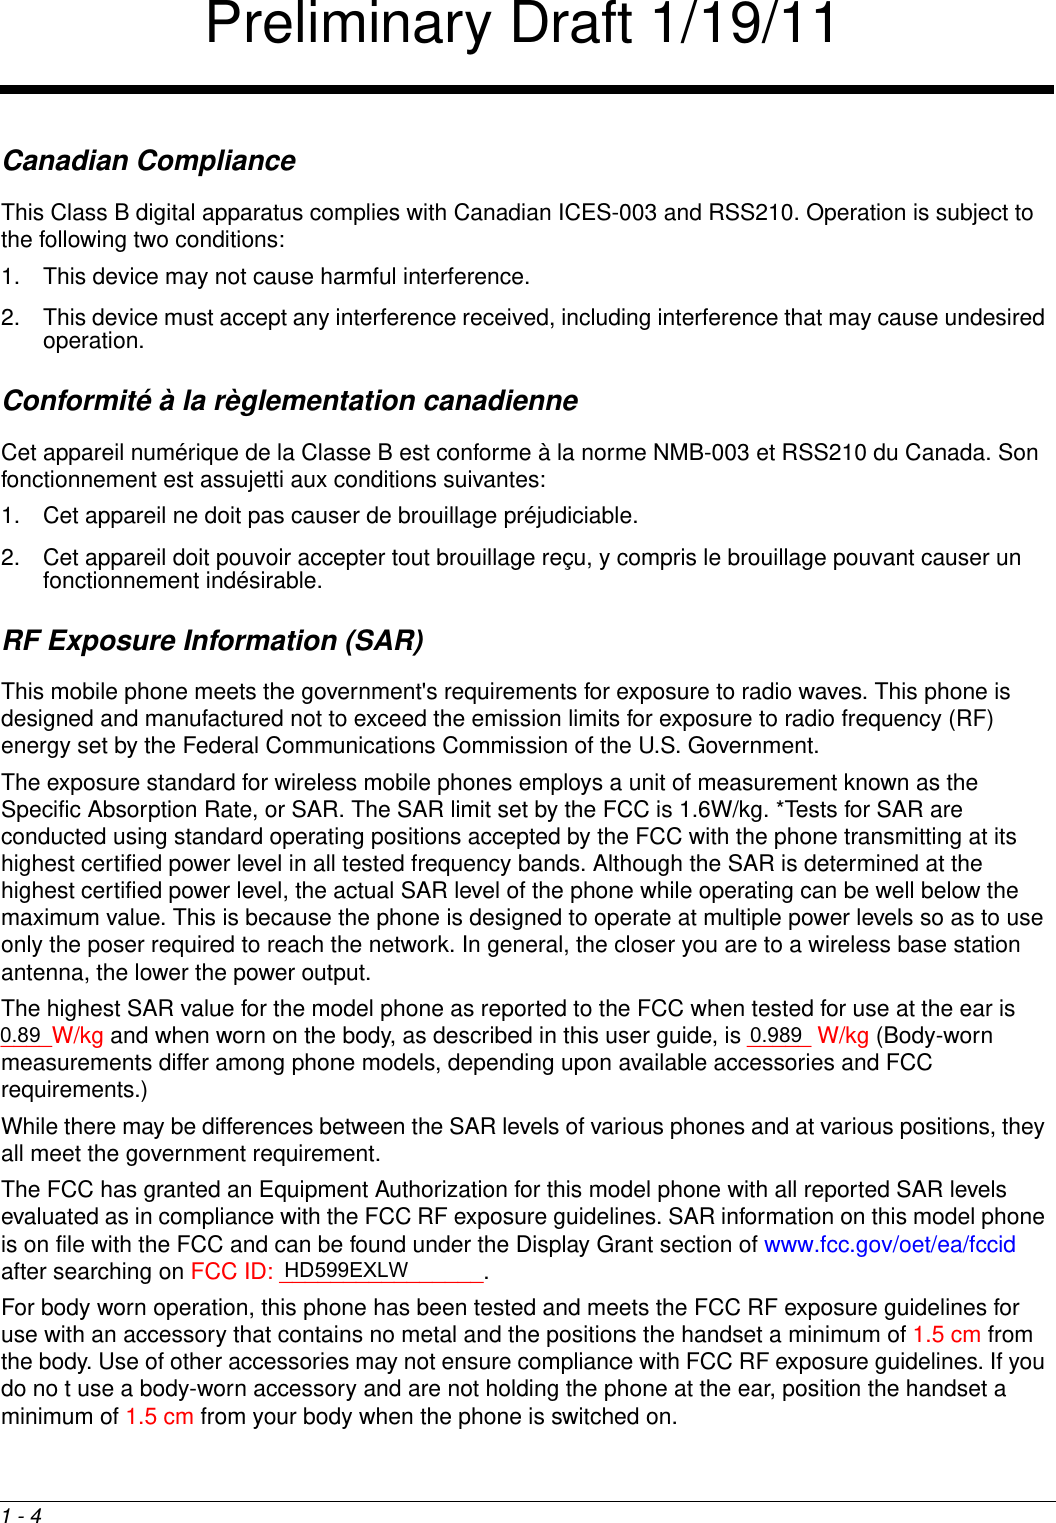 1 - 4Canadian ComplianceThis Class B digital apparatus complies with Canadian ICES-003 and RSS210. Operation is subject to the following two conditions: 1. This device may not cause harmful interference.2. This device must accept any interference received, including interference that may cause undesired operation. Conformité à la règlementation canadienneCet appareil numérique de la Classe B est conforme à la norme NMB-003 et RSS210 du Canada. Son fonctionnement est assujetti aux conditions suivantes: 1. Cet appareil ne doit pas causer de brouillage préjudiciable. 2. Cet appareil doit pouvoir accepter tout brouillage reçu, y compris le brouillage pouvant causer un fonctionnement indésirable.RF Exposure Information (SAR)This mobile phone meets the government&apos;s requirements for exposure to radio waves. This phone is designed and manufactured not to exceed the emission limits for exposure to radio frequency (RF) energy set by the Federal Communications Commission of the U.S. Government.The exposure standard for wireless mobile phones employs a unit of measurement known as the Specific Absorption Rate, or SAR. The SAR limit set by the FCC is 1.6W/kg. *Tests for SAR are conducted using standard operating positions accepted by the FCC with the phone transmitting at its highest certified power level in all tested frequency bands. Although the SAR is determined at the highest certified power level, the actual SAR level of the phone while operating can be well below the maximum value. This is because the phone is designed to operate at multiple power levels so as to use only the poser required to reach the network. In general, the closer you are to a wireless base station antenna, the lower the power output.The highest SAR value for the model phone as reported to the FCC when tested for use at the ear is ____W/kg and when worn on the body, as described in this user guide, is _____ W/kg (Body-worn measurements differ among phone models, depending upon available accessories and FCC requirements.)While there may be differences between the SAR levels of various phones and at various positions, they all meet the government requirement.The FCC has granted an Equipment Authorization for this model phone with all reported SAR levels evaluated as in compliance with the FCC RF exposure guidelines. SAR information on this model phone is on file with the FCC and can be found under the Display Grant section of www.fcc.gov/oet/ea/fccid after searching on FCC ID: ________________.For body worn operation, this phone has been tested and meets the FCC RF exposure guidelines for use with an accessory that contains no metal and the positions the handset a minimum of 1.5 cm from the body. Use of other accessories may not ensure compliance with FCC RF exposure guidelines. If you do no t use a body-worn accessory and are not holding the phone at the ear, position the handset a minimum of 1.5 cm from your body when the phone is switched on.Preliminary Draft 1/19/11